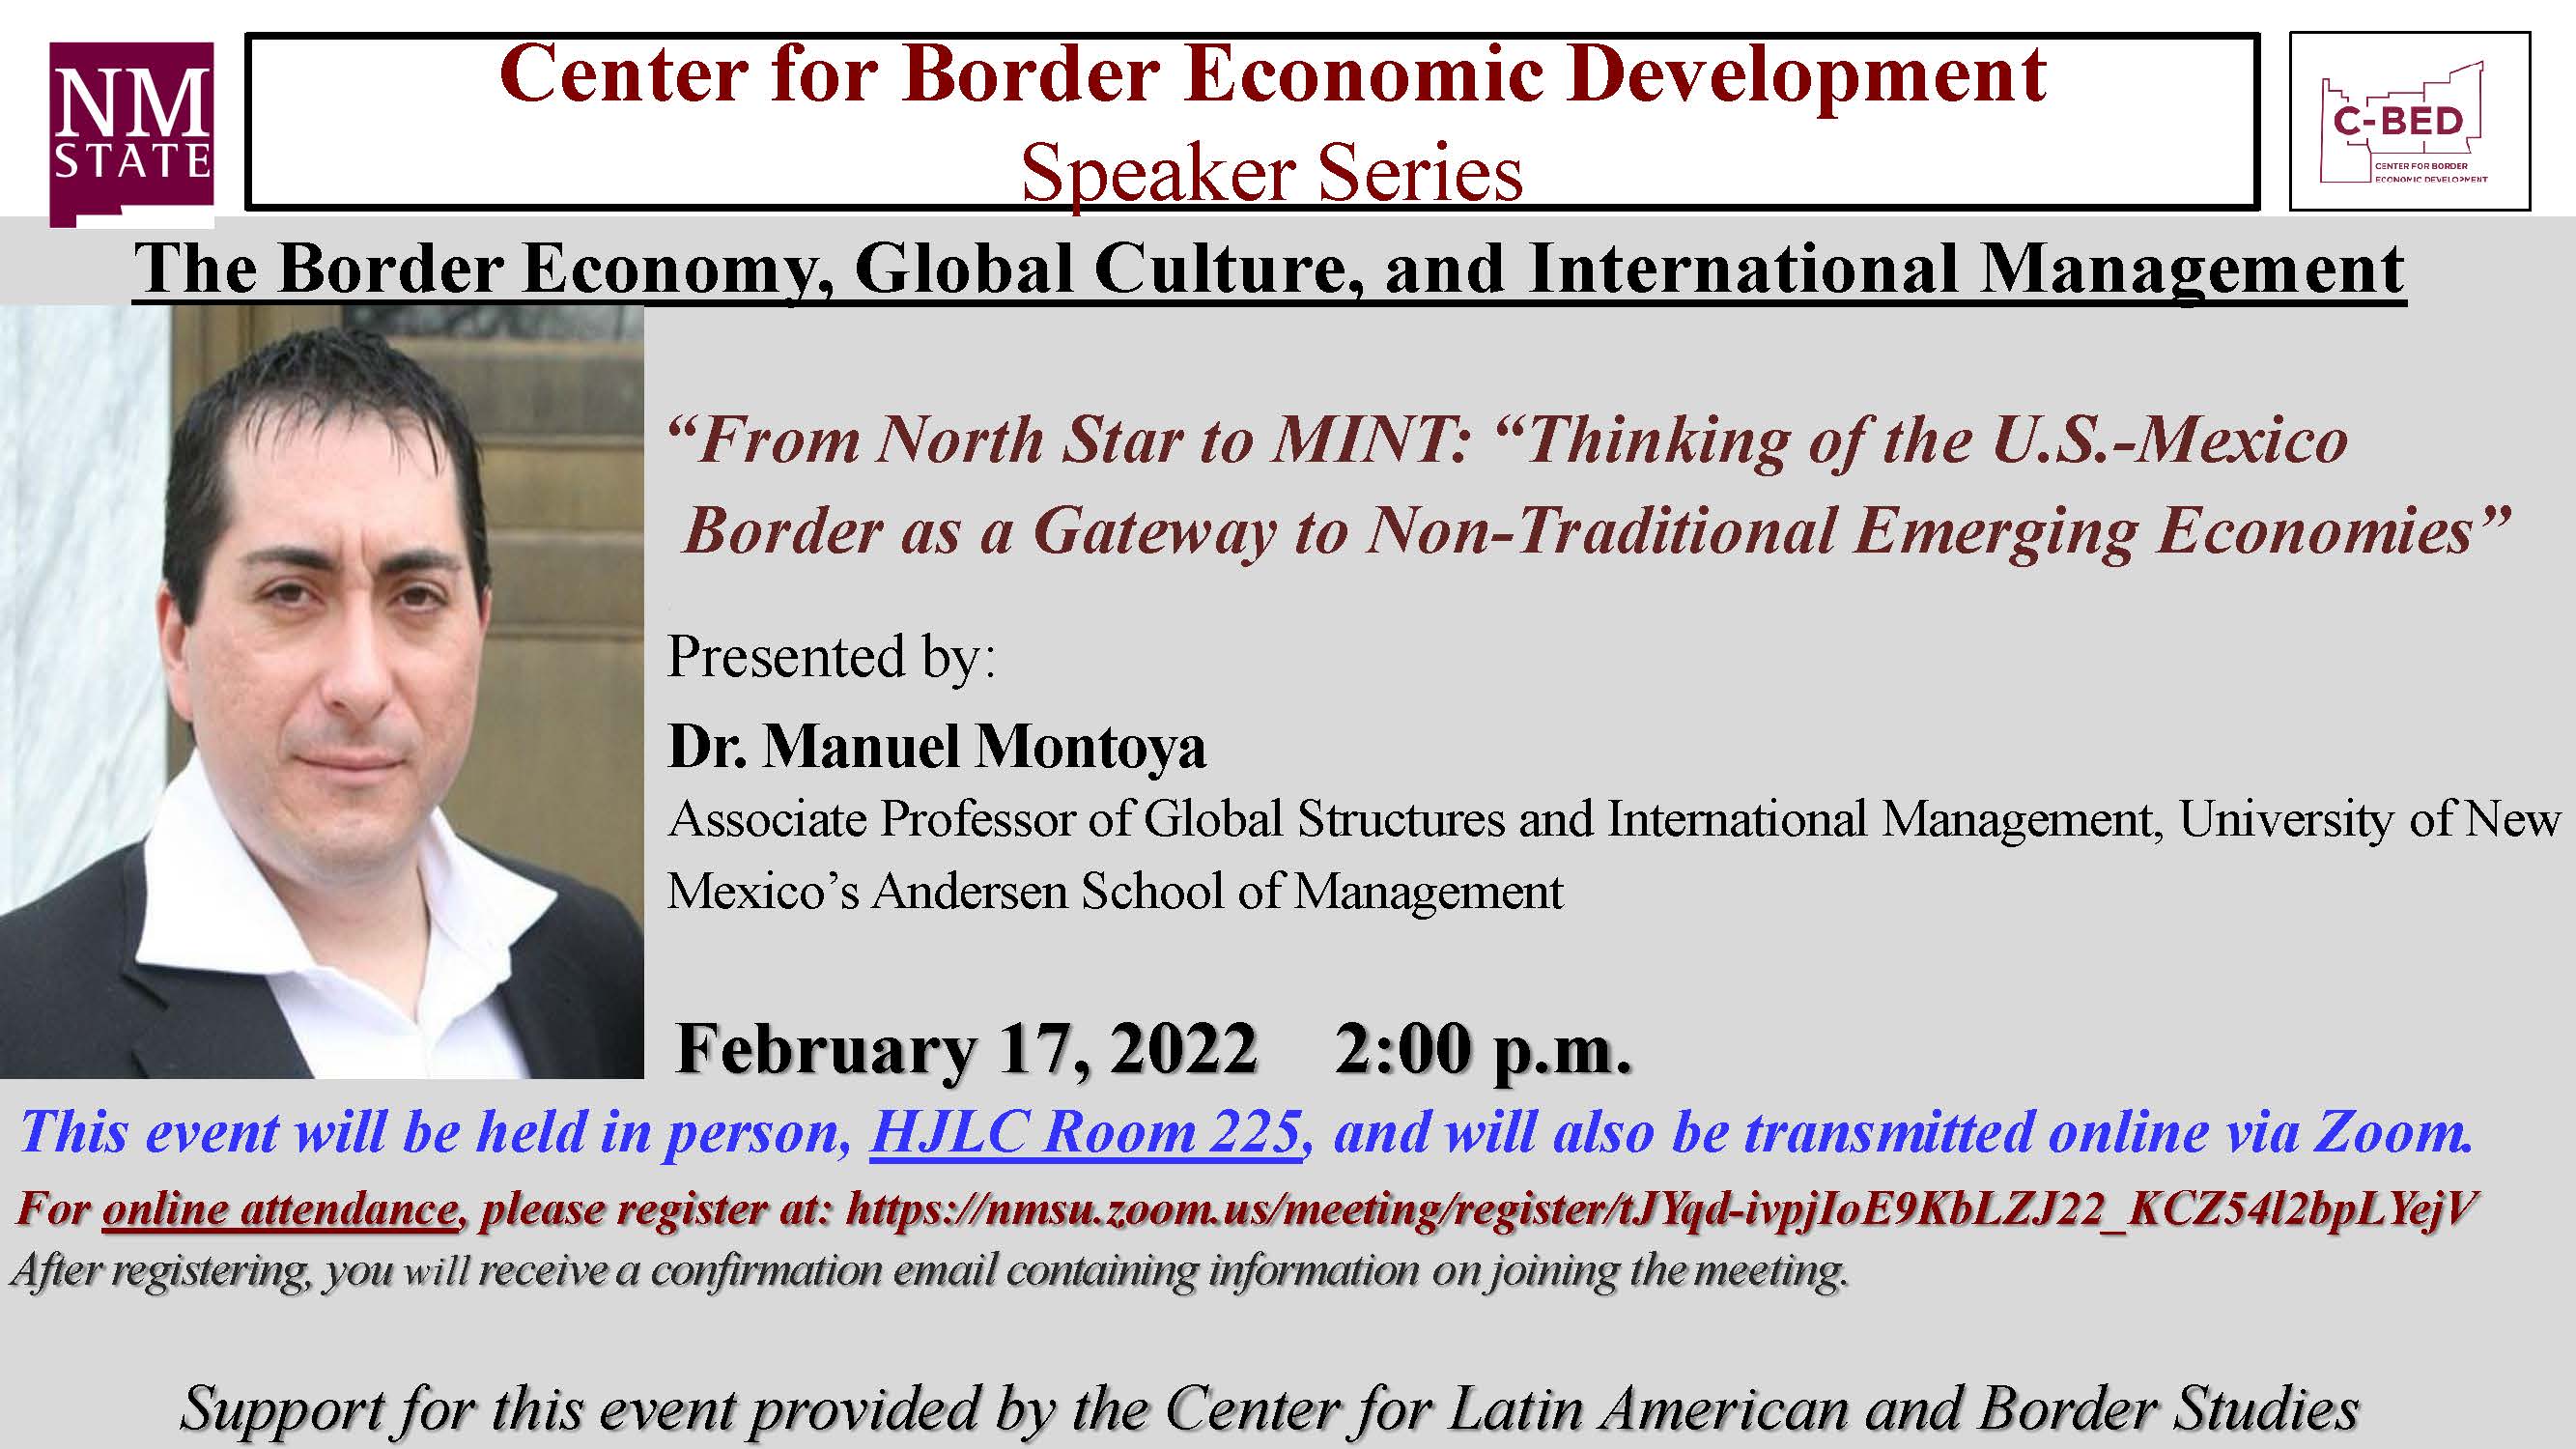 Flyer for the Border Economy, Global Culture, and International Management speaker series.